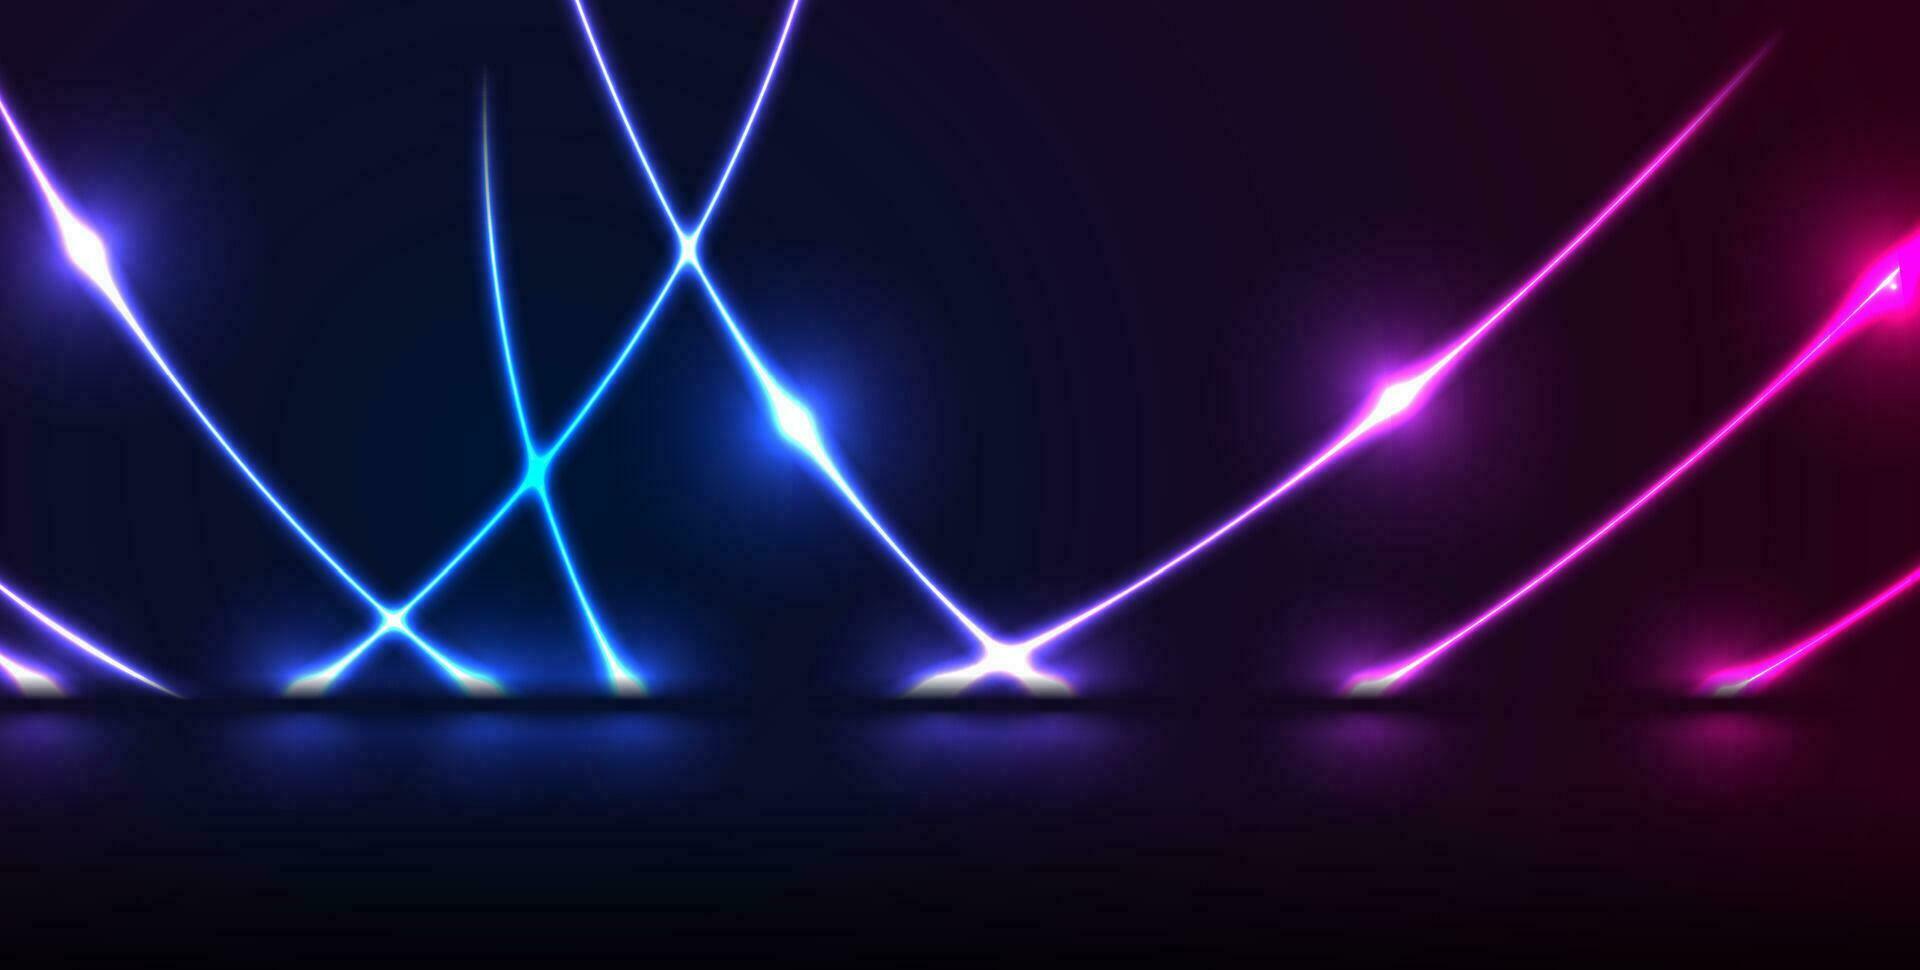 Blue purple neon laser curved lines technology modern background vector